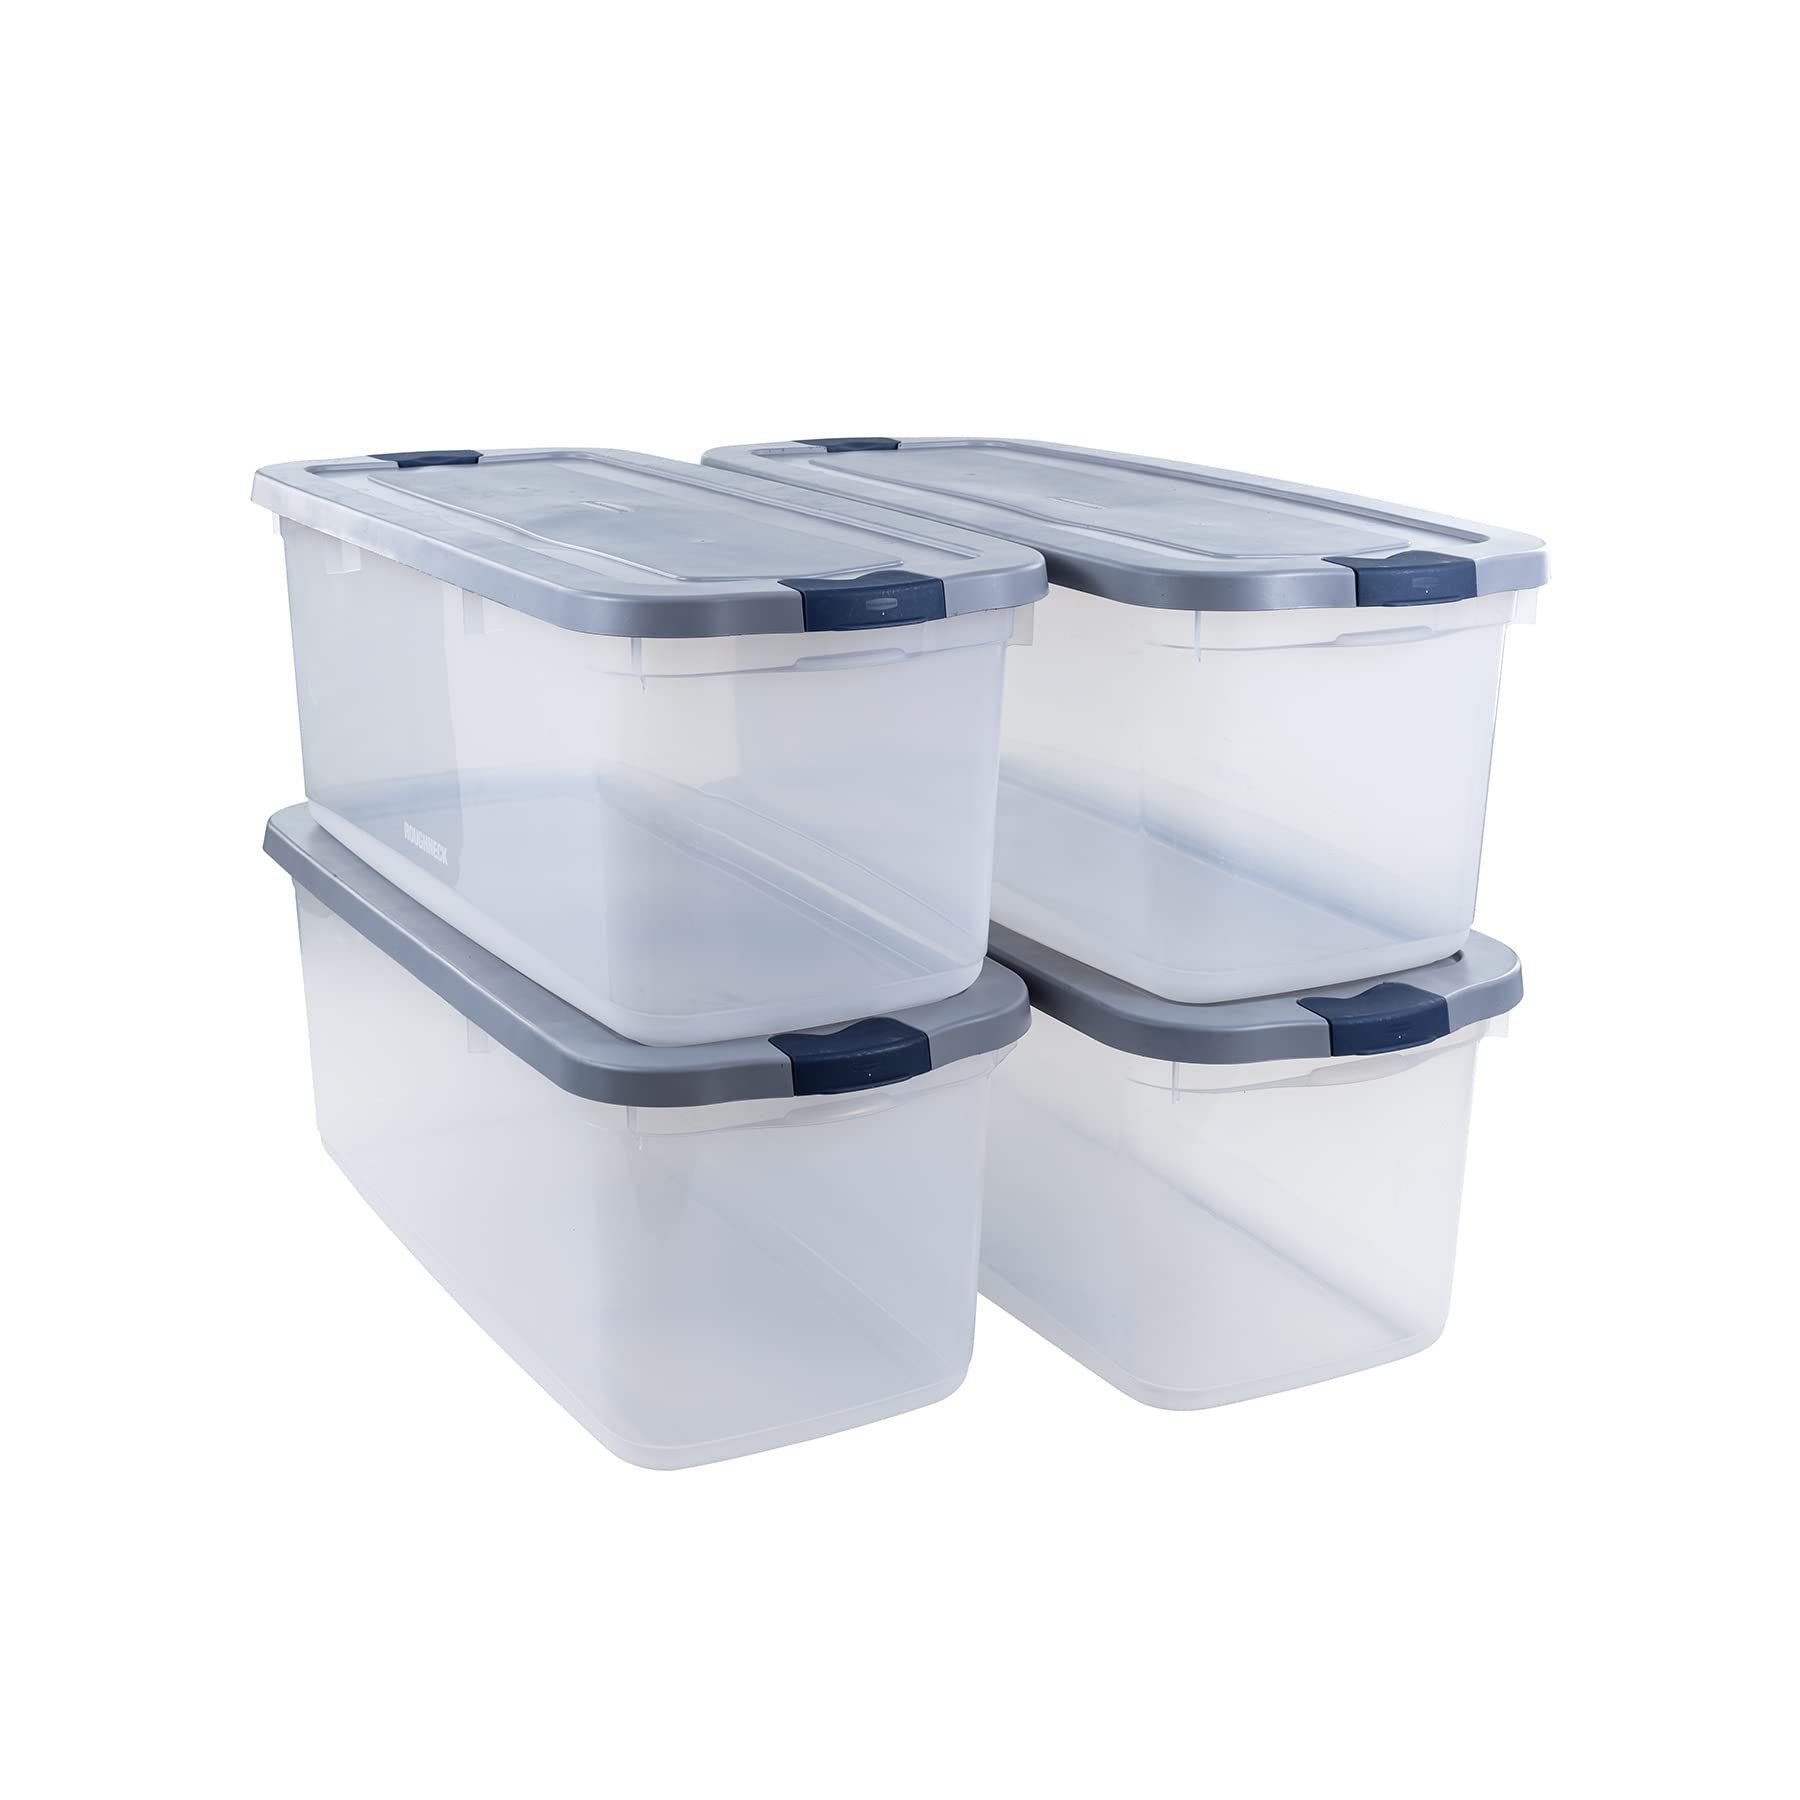 Rubbermaid Roughneck Clear 95 Qt/23.75 Gal Storage Containers, Pack of 4 with Latching Grey Lids, Visible Base, Sturdy and Stackable, Great for Storage and Organization